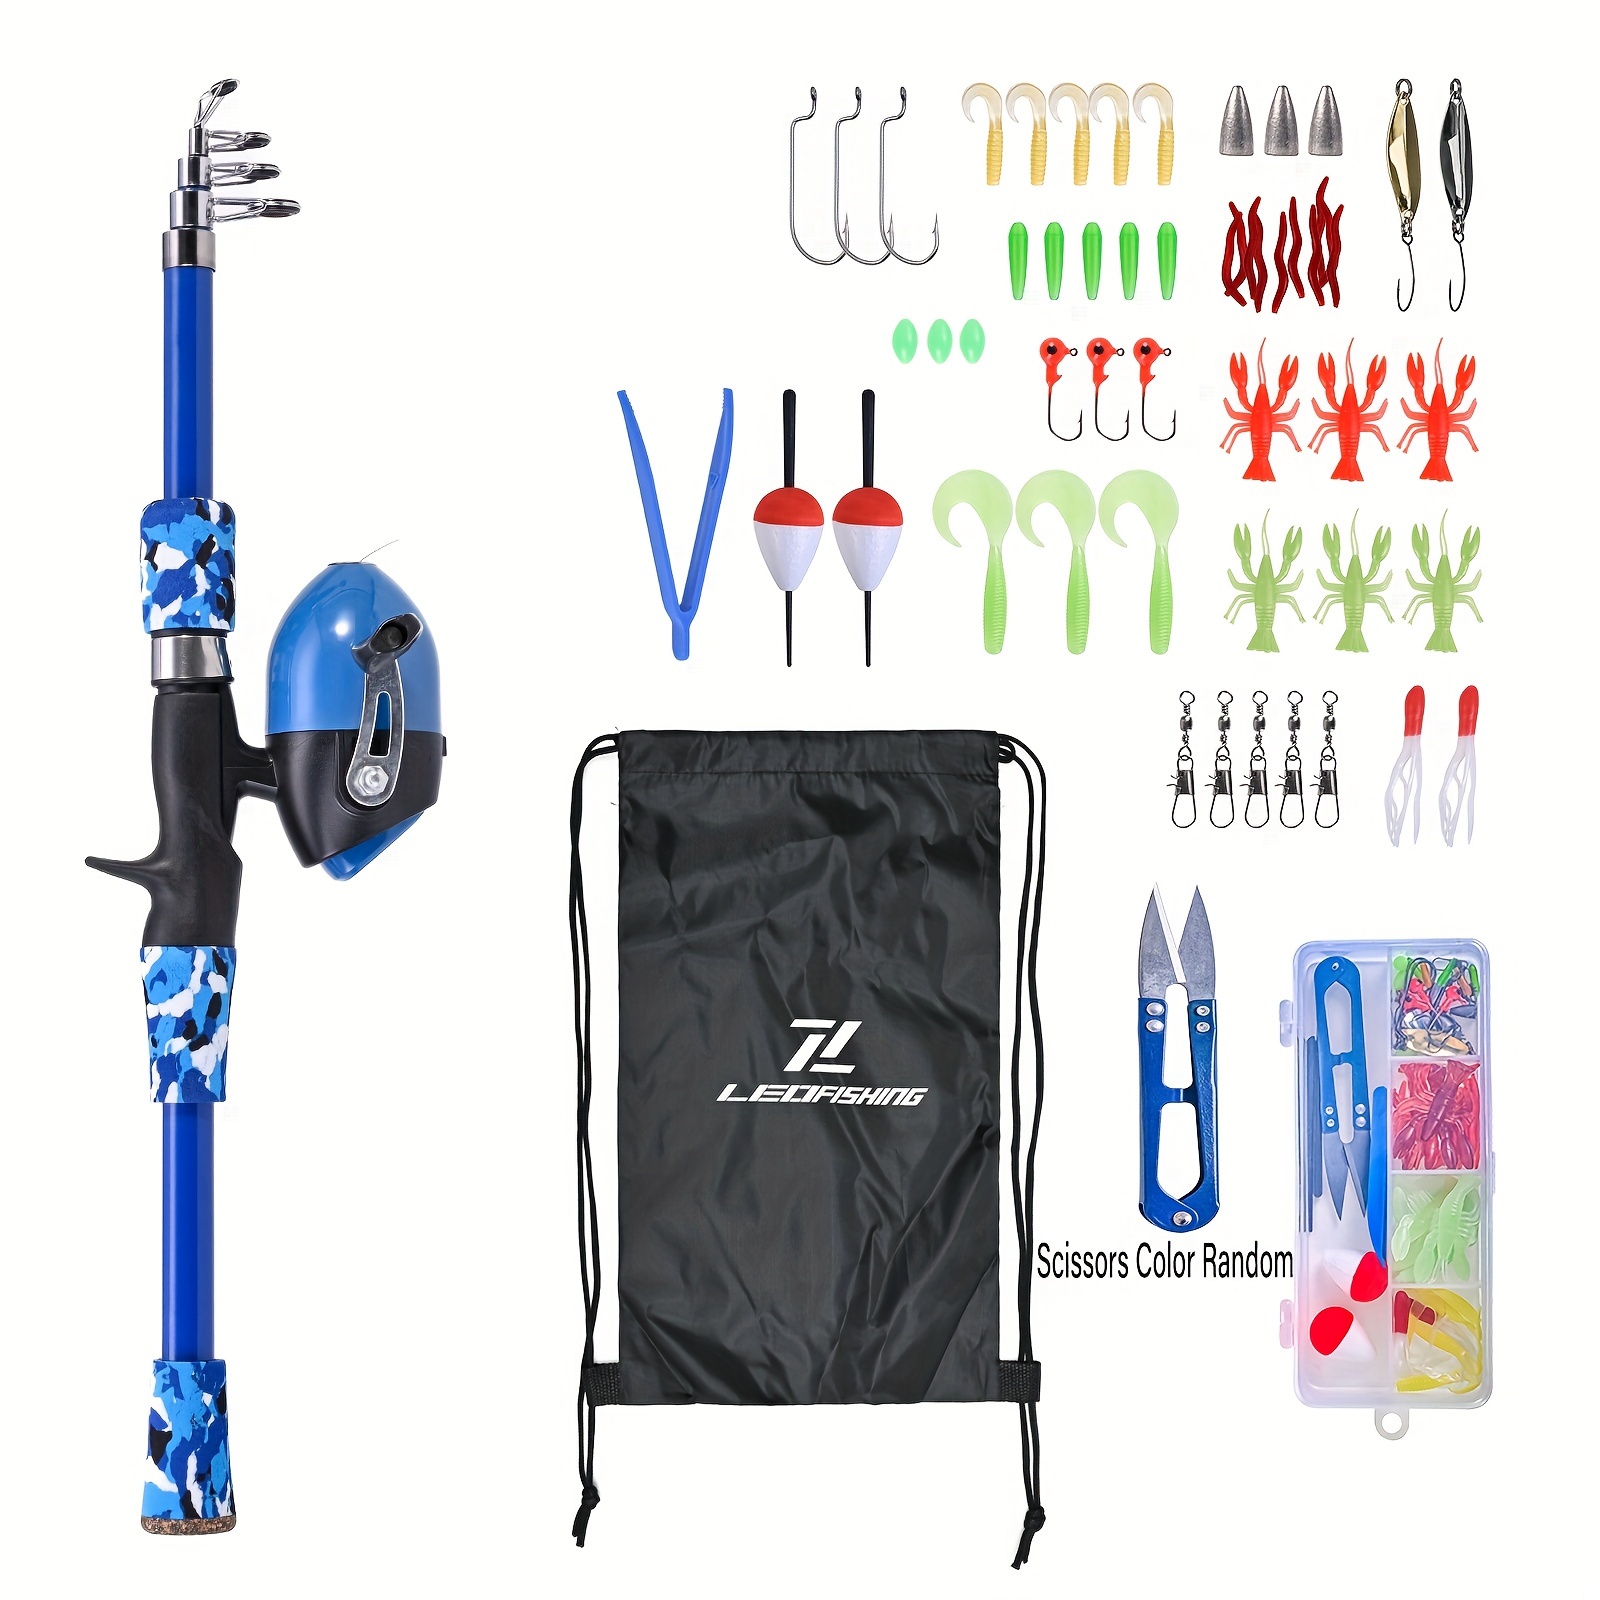  LEOFISHING Kids Fishing Pole Set Portable Telescopic Fishing  Rod and Reel Combos with Spincast/Spinning Fishing Reel Full Kits for  Beginner and Youth Girls Boys 150cm/4.92ft (Casting-Blue, 150cm) : Sports 